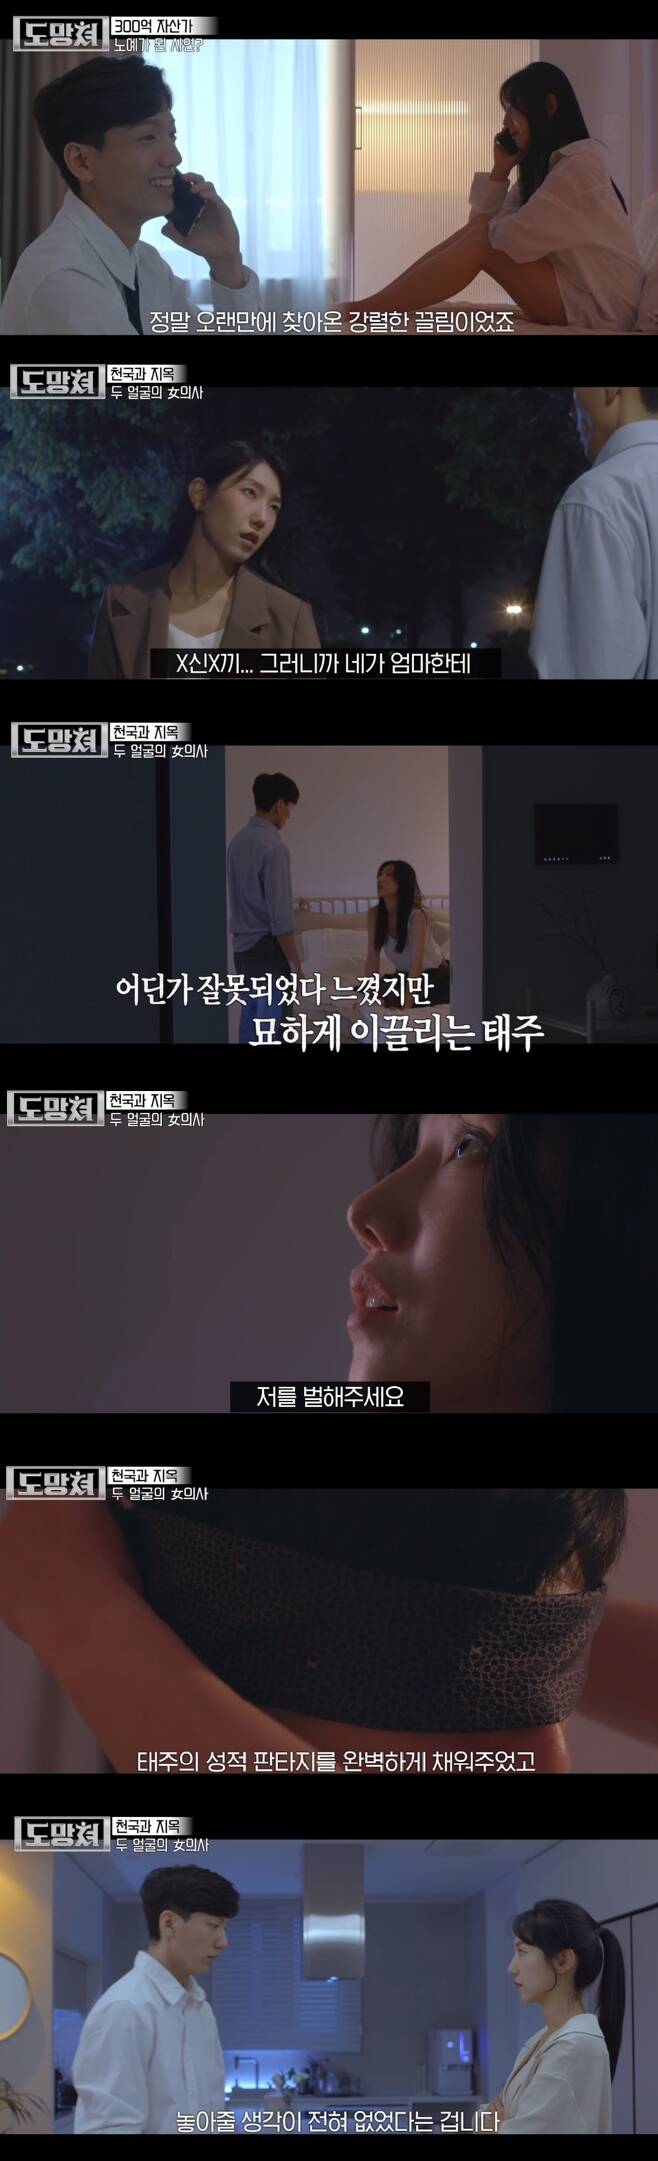 It added to the sadness of a Cuckold who said 30 billion a healthy man.On August 27, MBC The Hundred-Year-Old Man Who Climbed Out the Cheater, the story of Cuckold, who wanted a stop loss in the dual appearance of Hello, My Dolly Girlfriend, got on the air.On the day of the show, 30 billion a healthy man Cuckold became a slave by his own feet was revealed. The actual protagonist of the incident also caught the attention of watching some adapted stories for mosaic processing and personal protection.In the public reenactment video, Cuckold was introduced as a 180cm, beautiful appearance, a good businessman, a 30 billion won a healthy man, and a successful Cuckold.He could not have a proper love for forty years, and he felt lonely because he missed the marriage age.In the meantime, Cuckold met a woman on a dating app, a beautiful dermatologist from S University, and they had a good conversation and were attracted to each other for seven hours on their first phone call.Cuckold was happy to have an intense attraction to his daily life.The two, who whispered love with messages and conversations every day, met two weeks later. The woman said, I talked to my friends a lot and asked why I met such a person.He told me to meet a doctor, a lawyer, or someone similar to me.  I still want to meet Mr. Taeju (pseudonym). No matter what, do not you just want us to be good? Cuckold, Hello, and My Dolly Girlfriend had a date like everyone else. A healthy man and a professional meeting were big and the cost of dating for a month was about 10 million won.In the meantime, the two of them had a place to introduce each others acquaintances. Hello, My Dolly Girlfriends acquaintance is a close brothers chair doctor.Hello, My Dolly Girlfriend boasted a friendly look and a deep skinship throughout the meal, and Namsa Chin crossed the line, saying, If I did not get married, I would probably have been with Michelle Chen.Cuckold didnt look so good, and Hello, My Dolly Girlfriend said, What are you doing?This X is crazy, Rant made everyone amazed.Drunk Hello, My Dolly Girlfriend poured Rant into Cuckolds sick family, saying, X X X, so you grew up with your mother.The moment the woman he loved turned into something he was afraid of in a moment. Cuckold thought it was because he was too drunk.But the video that followed shocked even more: Hello, My Dolly Girlfriend, who arrived home, drunkenly told Cuckold, I was wrong, punish me, X me.While the studio was astonished, Cuckold could not refuse Hello, My Dolly Girlfriend, and later said that he could not easily escape from Hello, My Dolly Girlfriend in his stimulating and different sexual fantasy.When I feel good, I am affectionate and loving, but on the day when I have a small complaint, Hello, My Dolly Girlfriend. The apple was always Cuckolds part.Cuckold decided to break up after worrying, but Hello, My Dolly Girlfriend even bit his fingernails to the point where Cuckolds fingernails were necrotic.Kim Ji-yong, a psychiatrist, said, I can not make a diagnosis because I did not see the woman directly, but I do not think she has a borderline personality.It may or may not be a disability level, but it does not integrate very large emotional ups and downs, organic anxiety, and the good and bad aspects of the other person, and it is the same for oneself. The storyteller who appeared in the studio said, I am doing business overseas and came to Korea by plane last night. We went through 100 days of love, 5-6 breakups, and introduced my mother earlier this year.Breakup informed me that I wanted to meet Cuckold who grew up in a bright house. As soon as I received the Breakup notice, I went abroad to The Hundred-Year-Old Man Who Climbed Out the .But again, when I was abroad, I got in touch again. Kim Ji-yong said, Its too bad for both of you to see the womans environment and situation and want to save her).Stop Loss is the answer to break the repetitive pattern, and the broadcast announced that it would continue to consult with Cuckold.